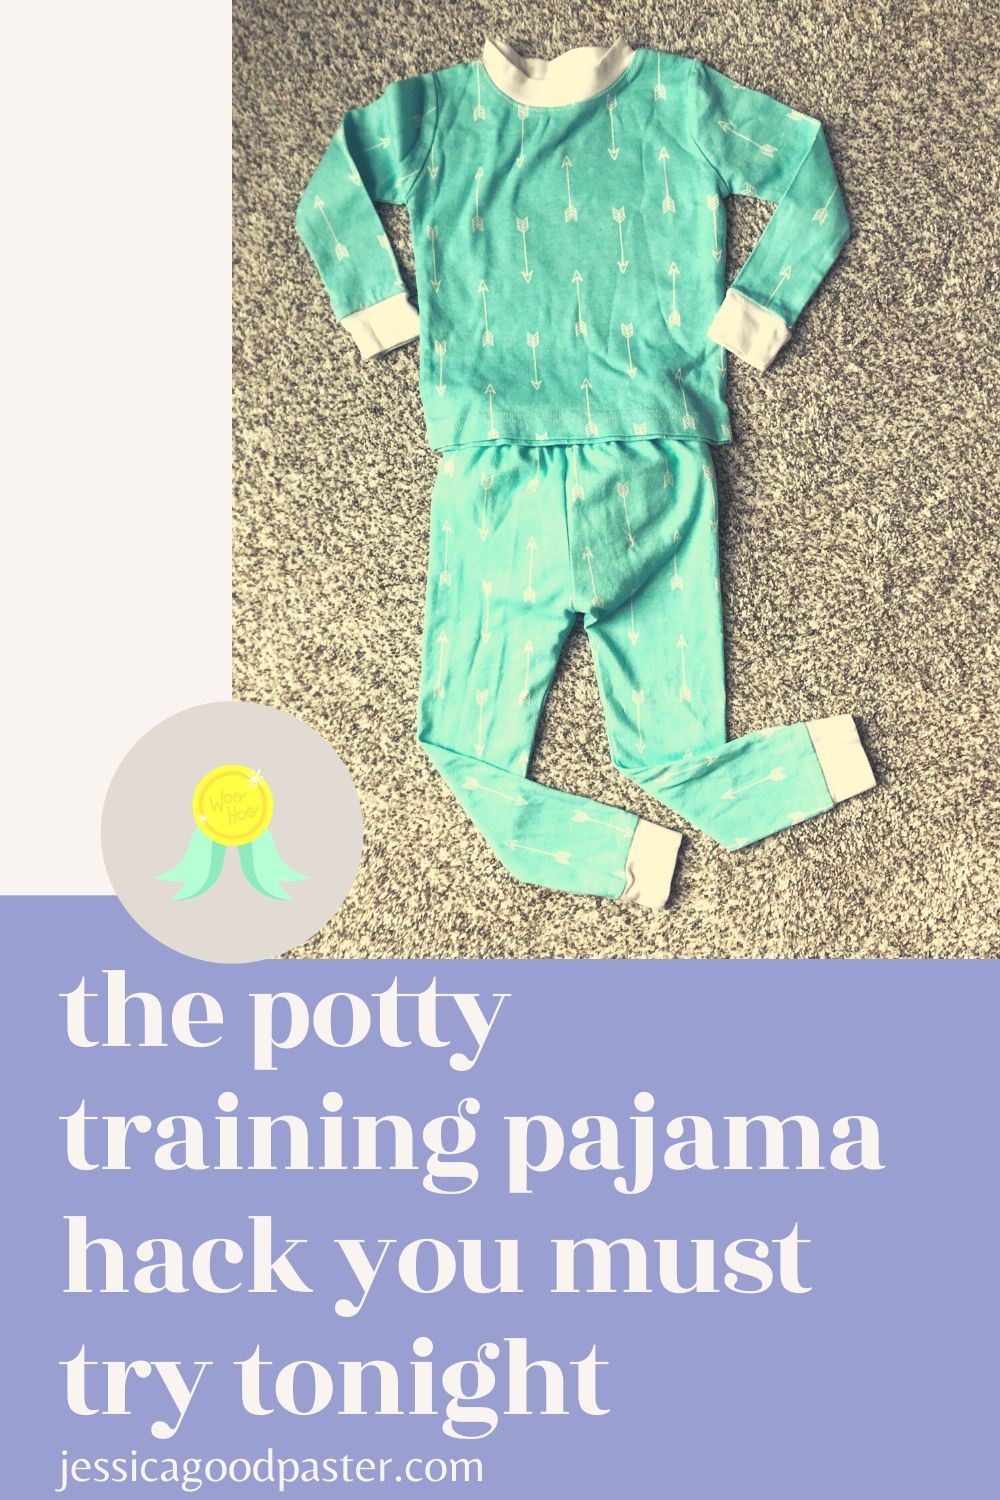 The Best Potty Training Hack - A Peejamas Review | This tip will help kid get over the hump of potty training at night. These essentials are great for boys and girls. Avoid expensive disposable overnight pull-ups with this pajama hack. #pottytraining  #pottytrainingtips #bedwetting #kidspajamas